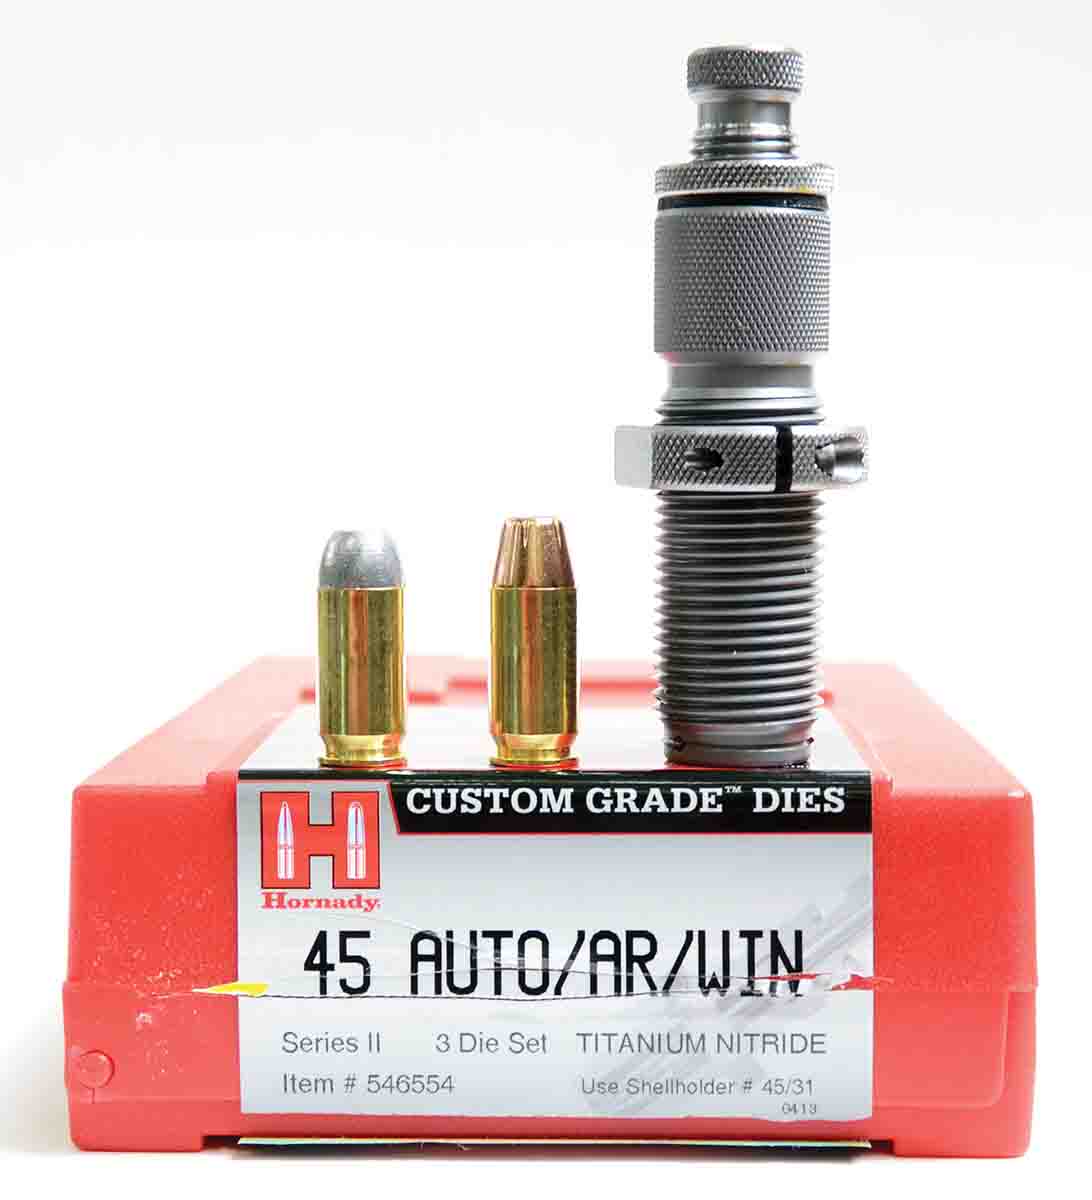 Reloading dies made for the .45 ACP work equally well for loading the .45 Super.